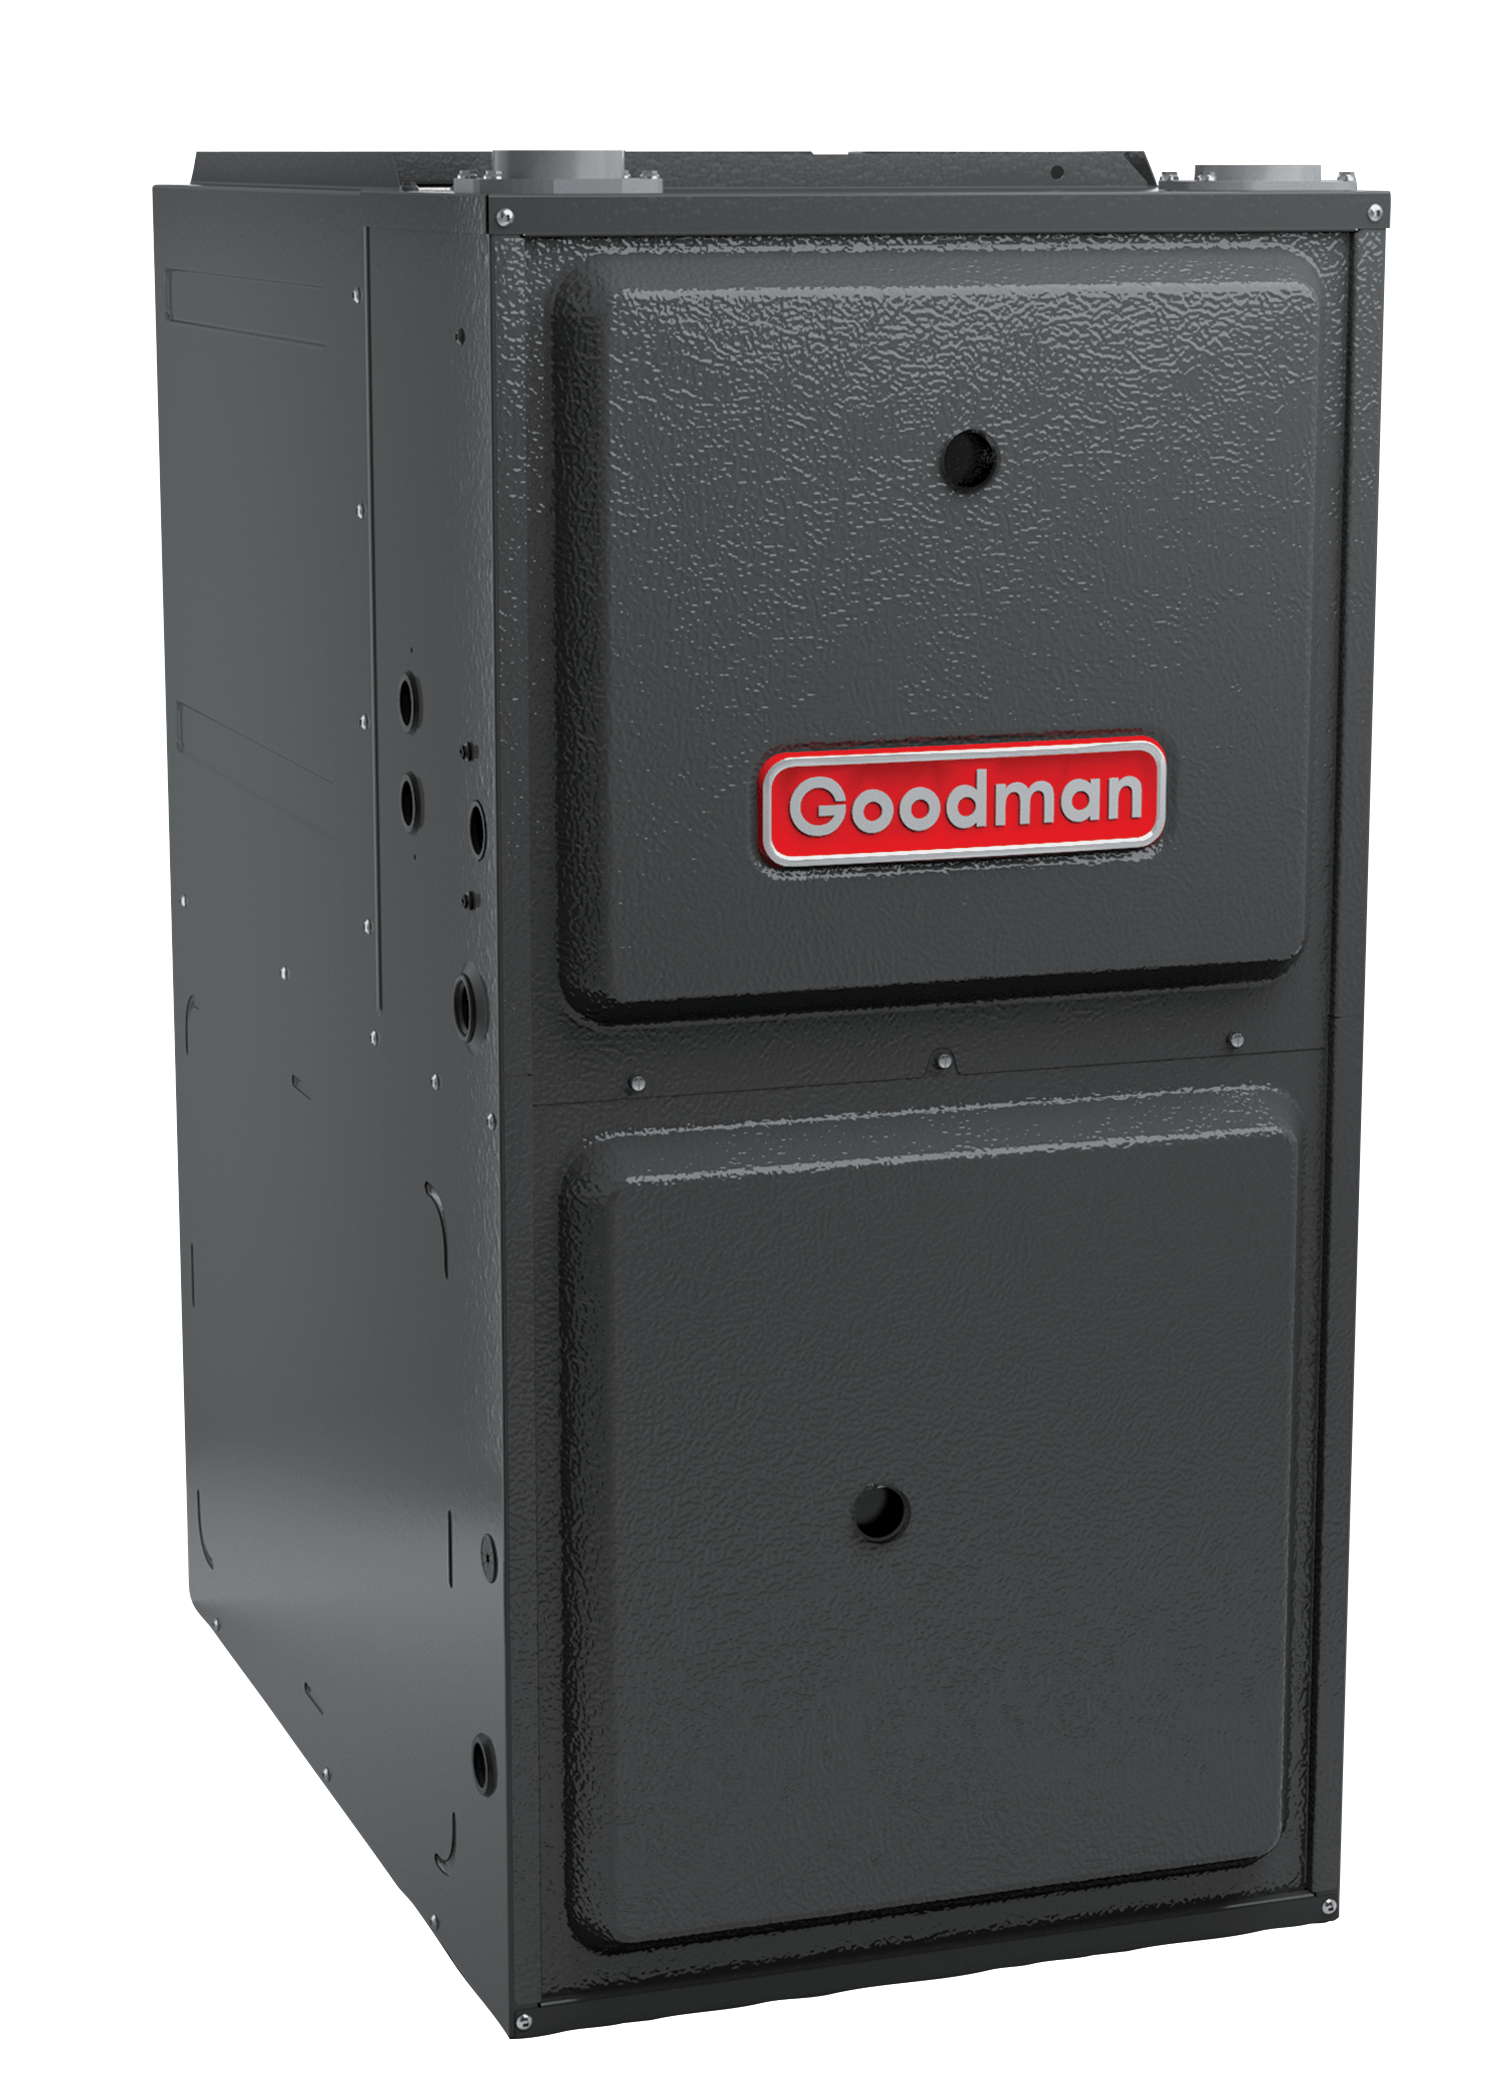 Goodman Furnace - Clinton, MO - Performance Heating Cooling and Chimney